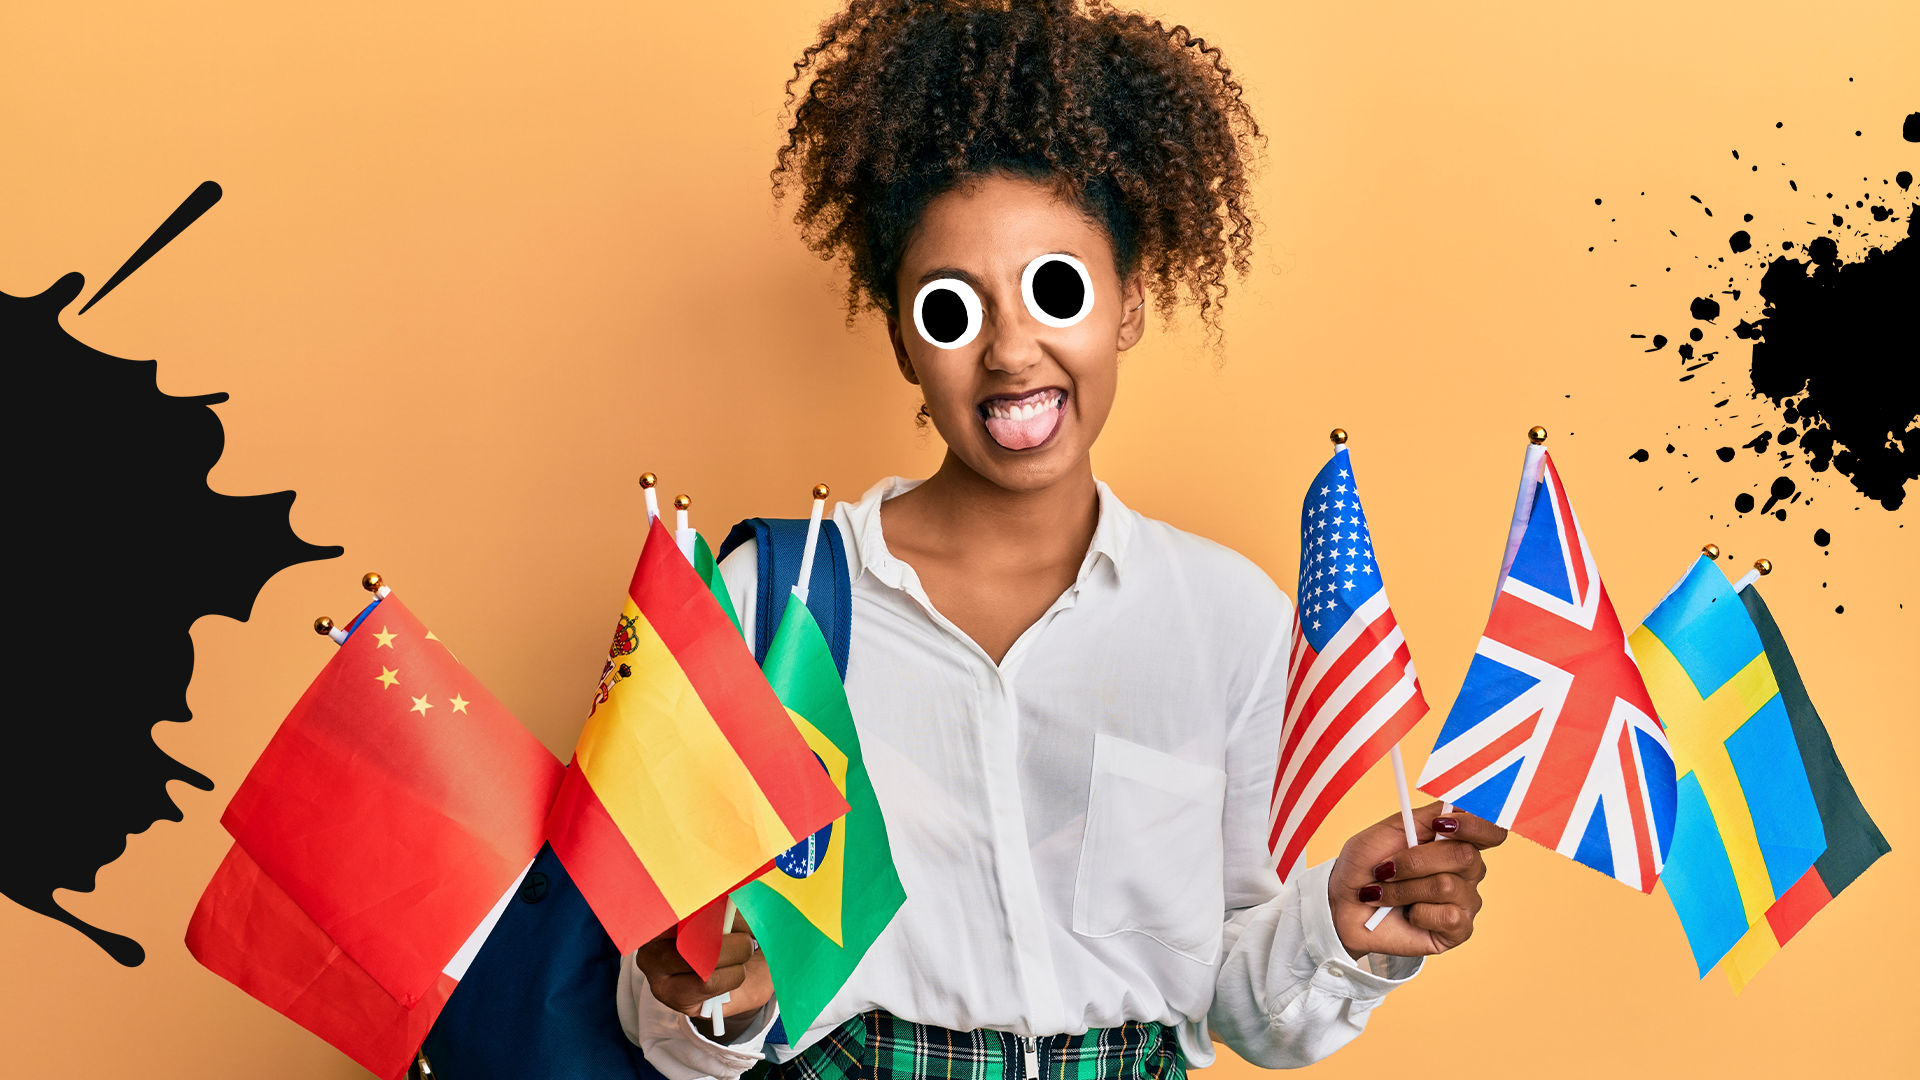 Woman holding world flags on orange background with splats